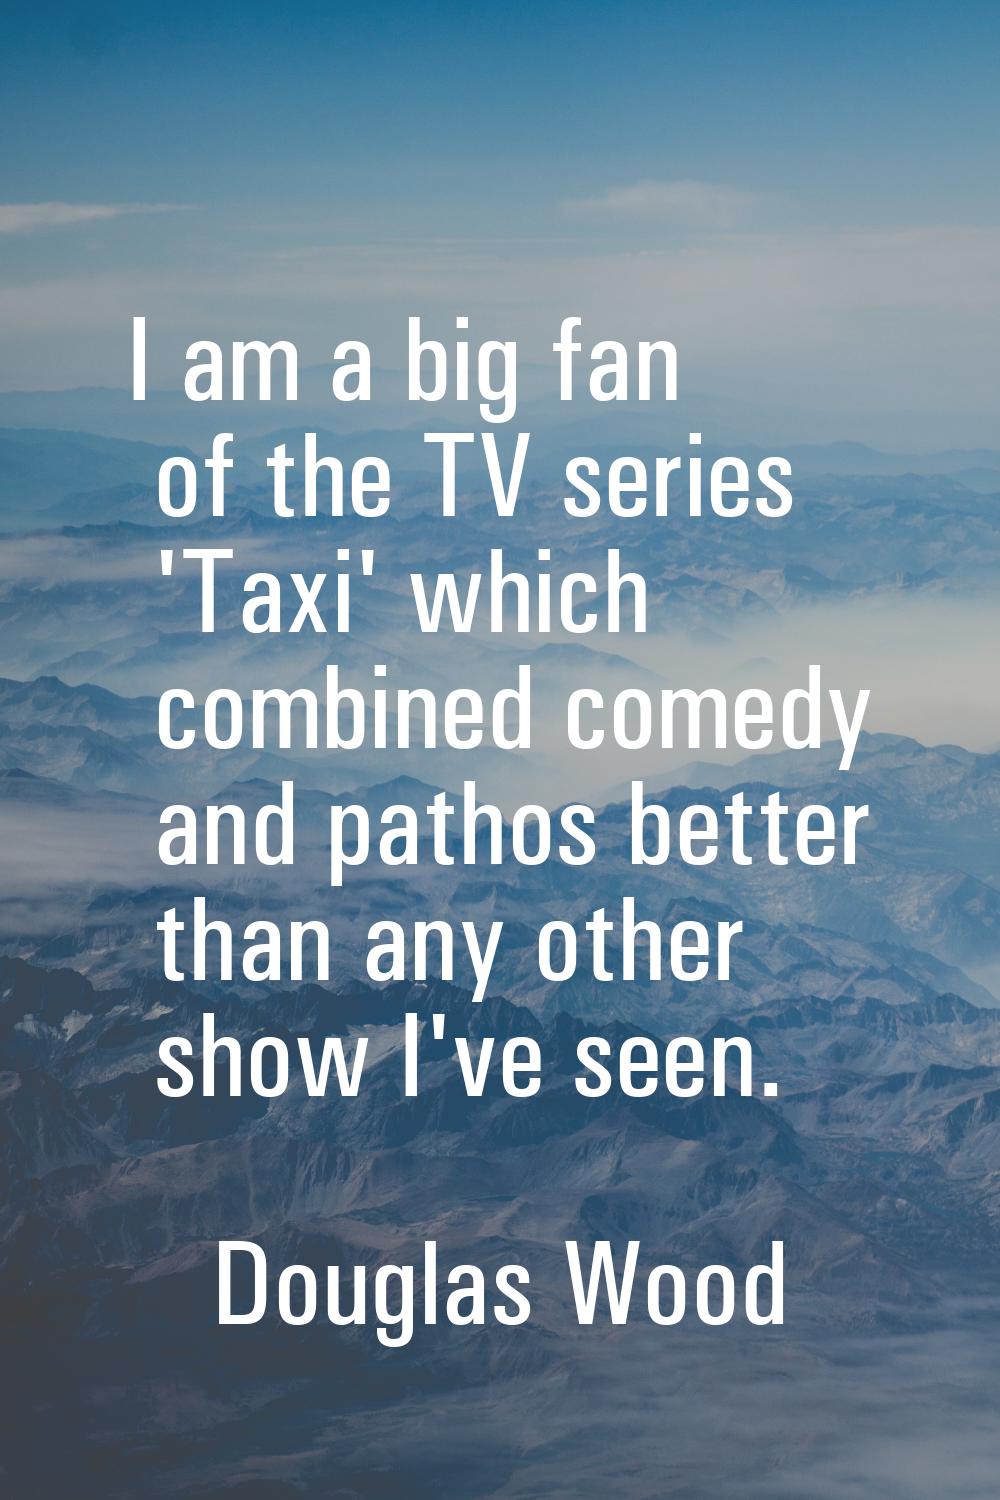 I am a big fan of the TV series 'Taxi' which combined comedy and pathos better than any other show 